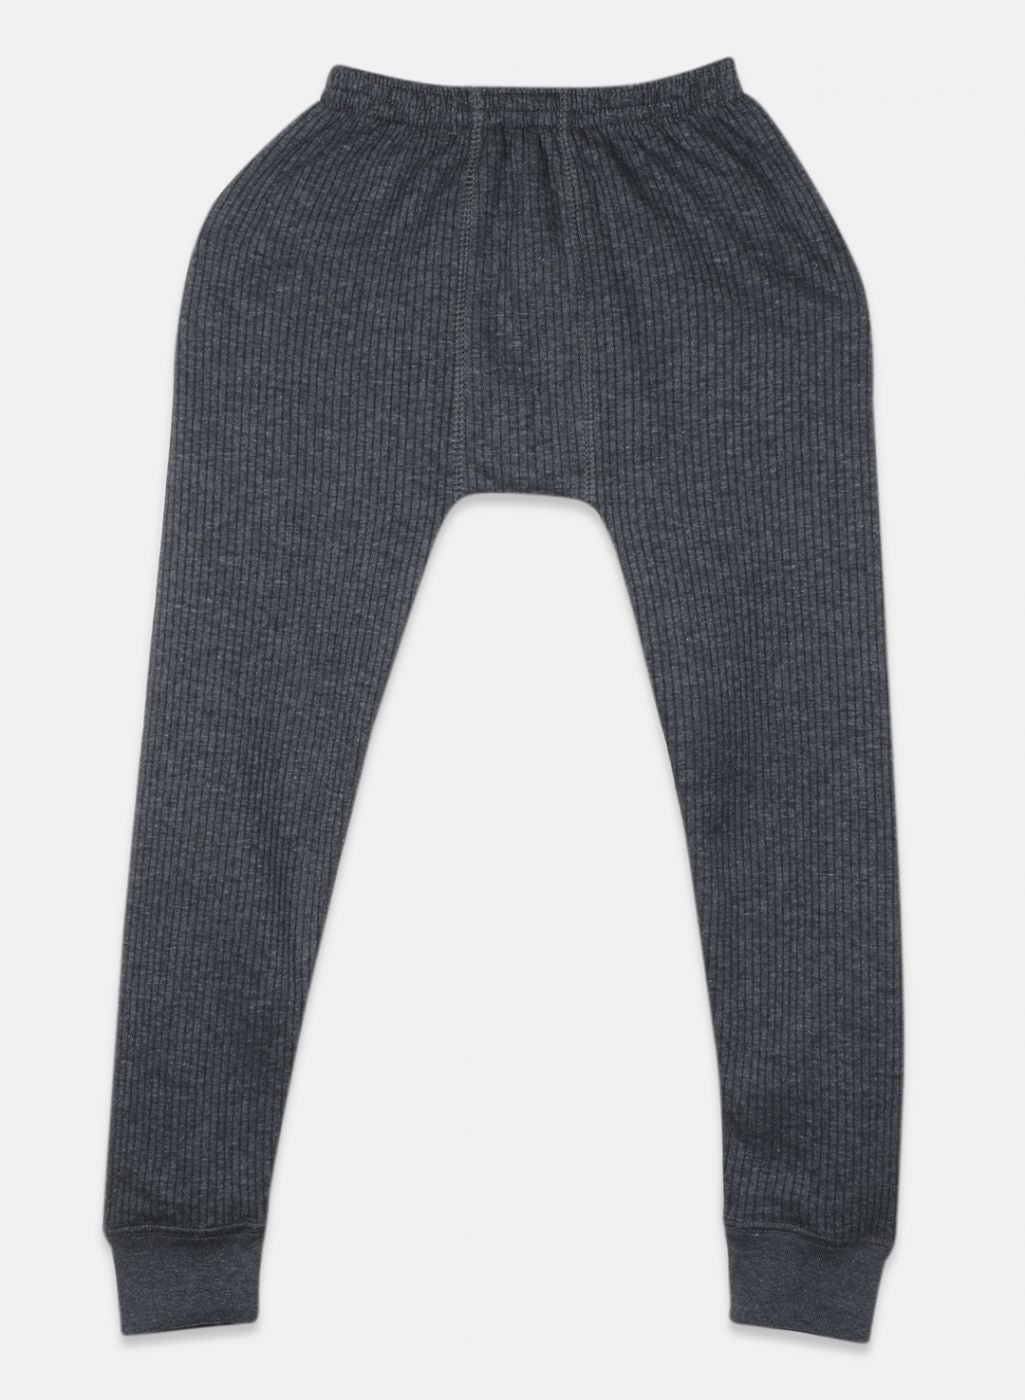 Boys Grey Solid Thermal Lower